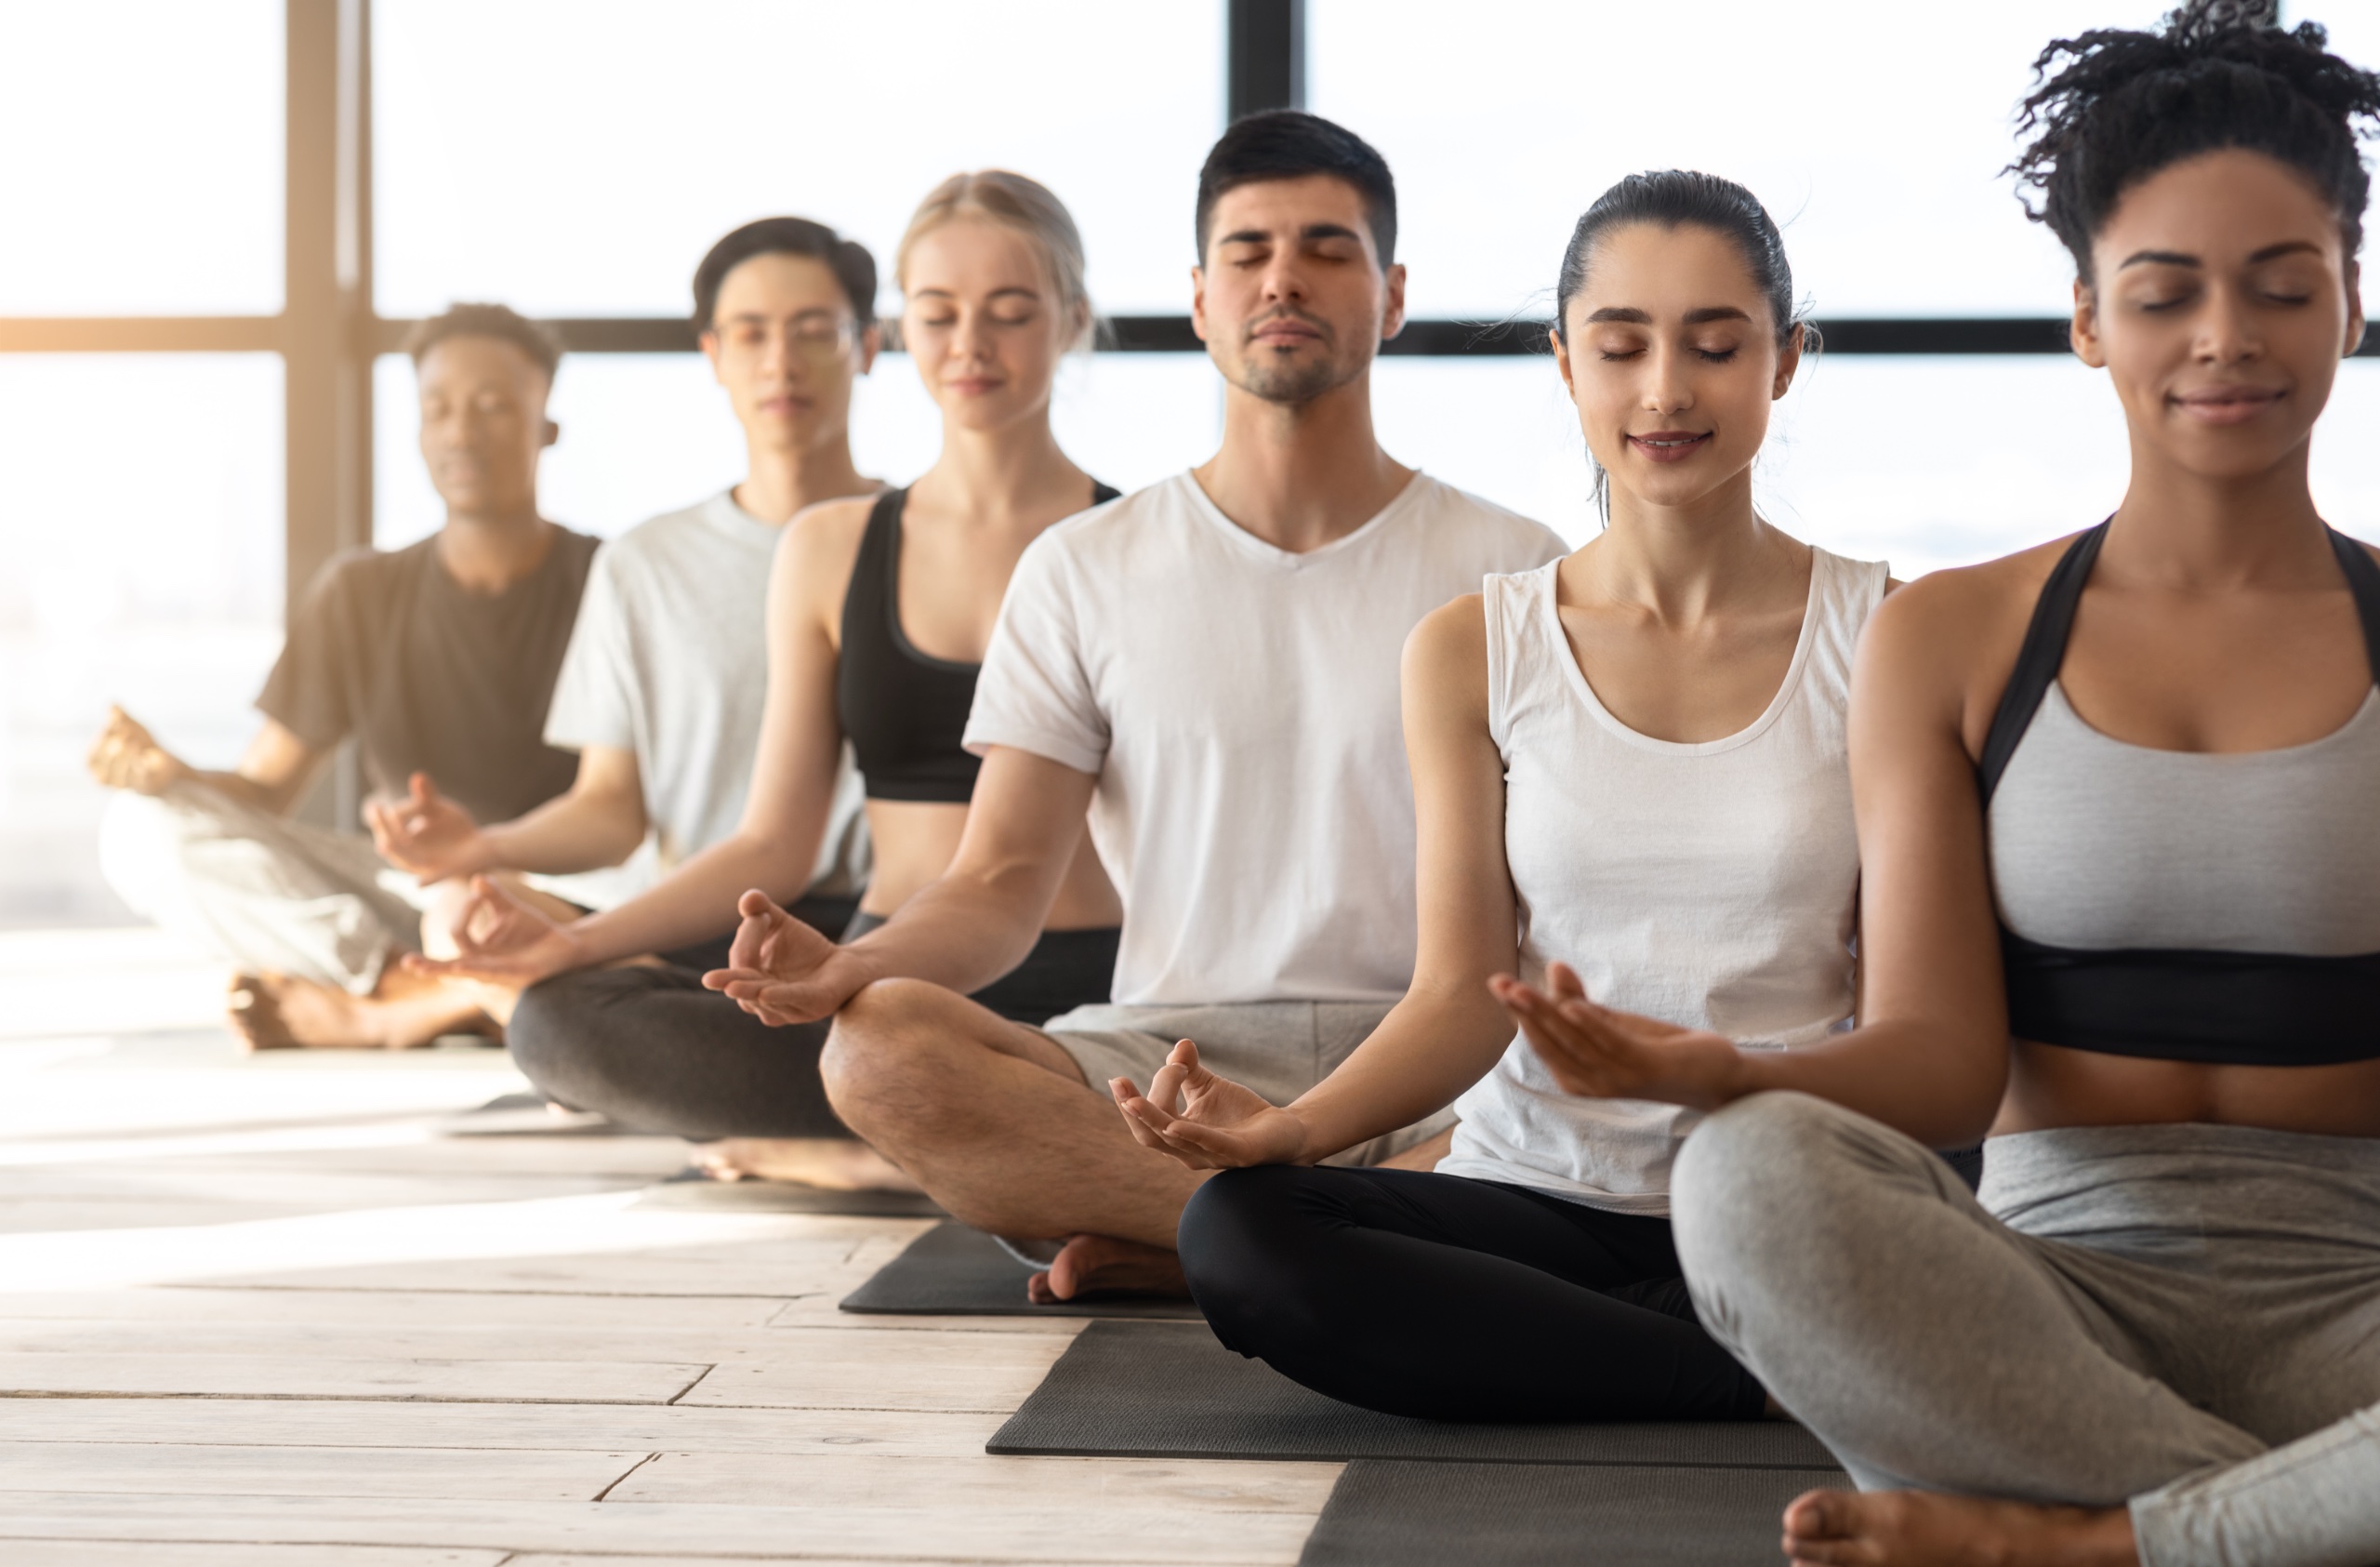 Group Meditation. Sporty Young Multiracial Men And Women Meditating Together During Yoga Class In Modern Light Studio, Sitting In A Row With Closed Eyes, Relaxing On Mats In Lotus Position, Free Space